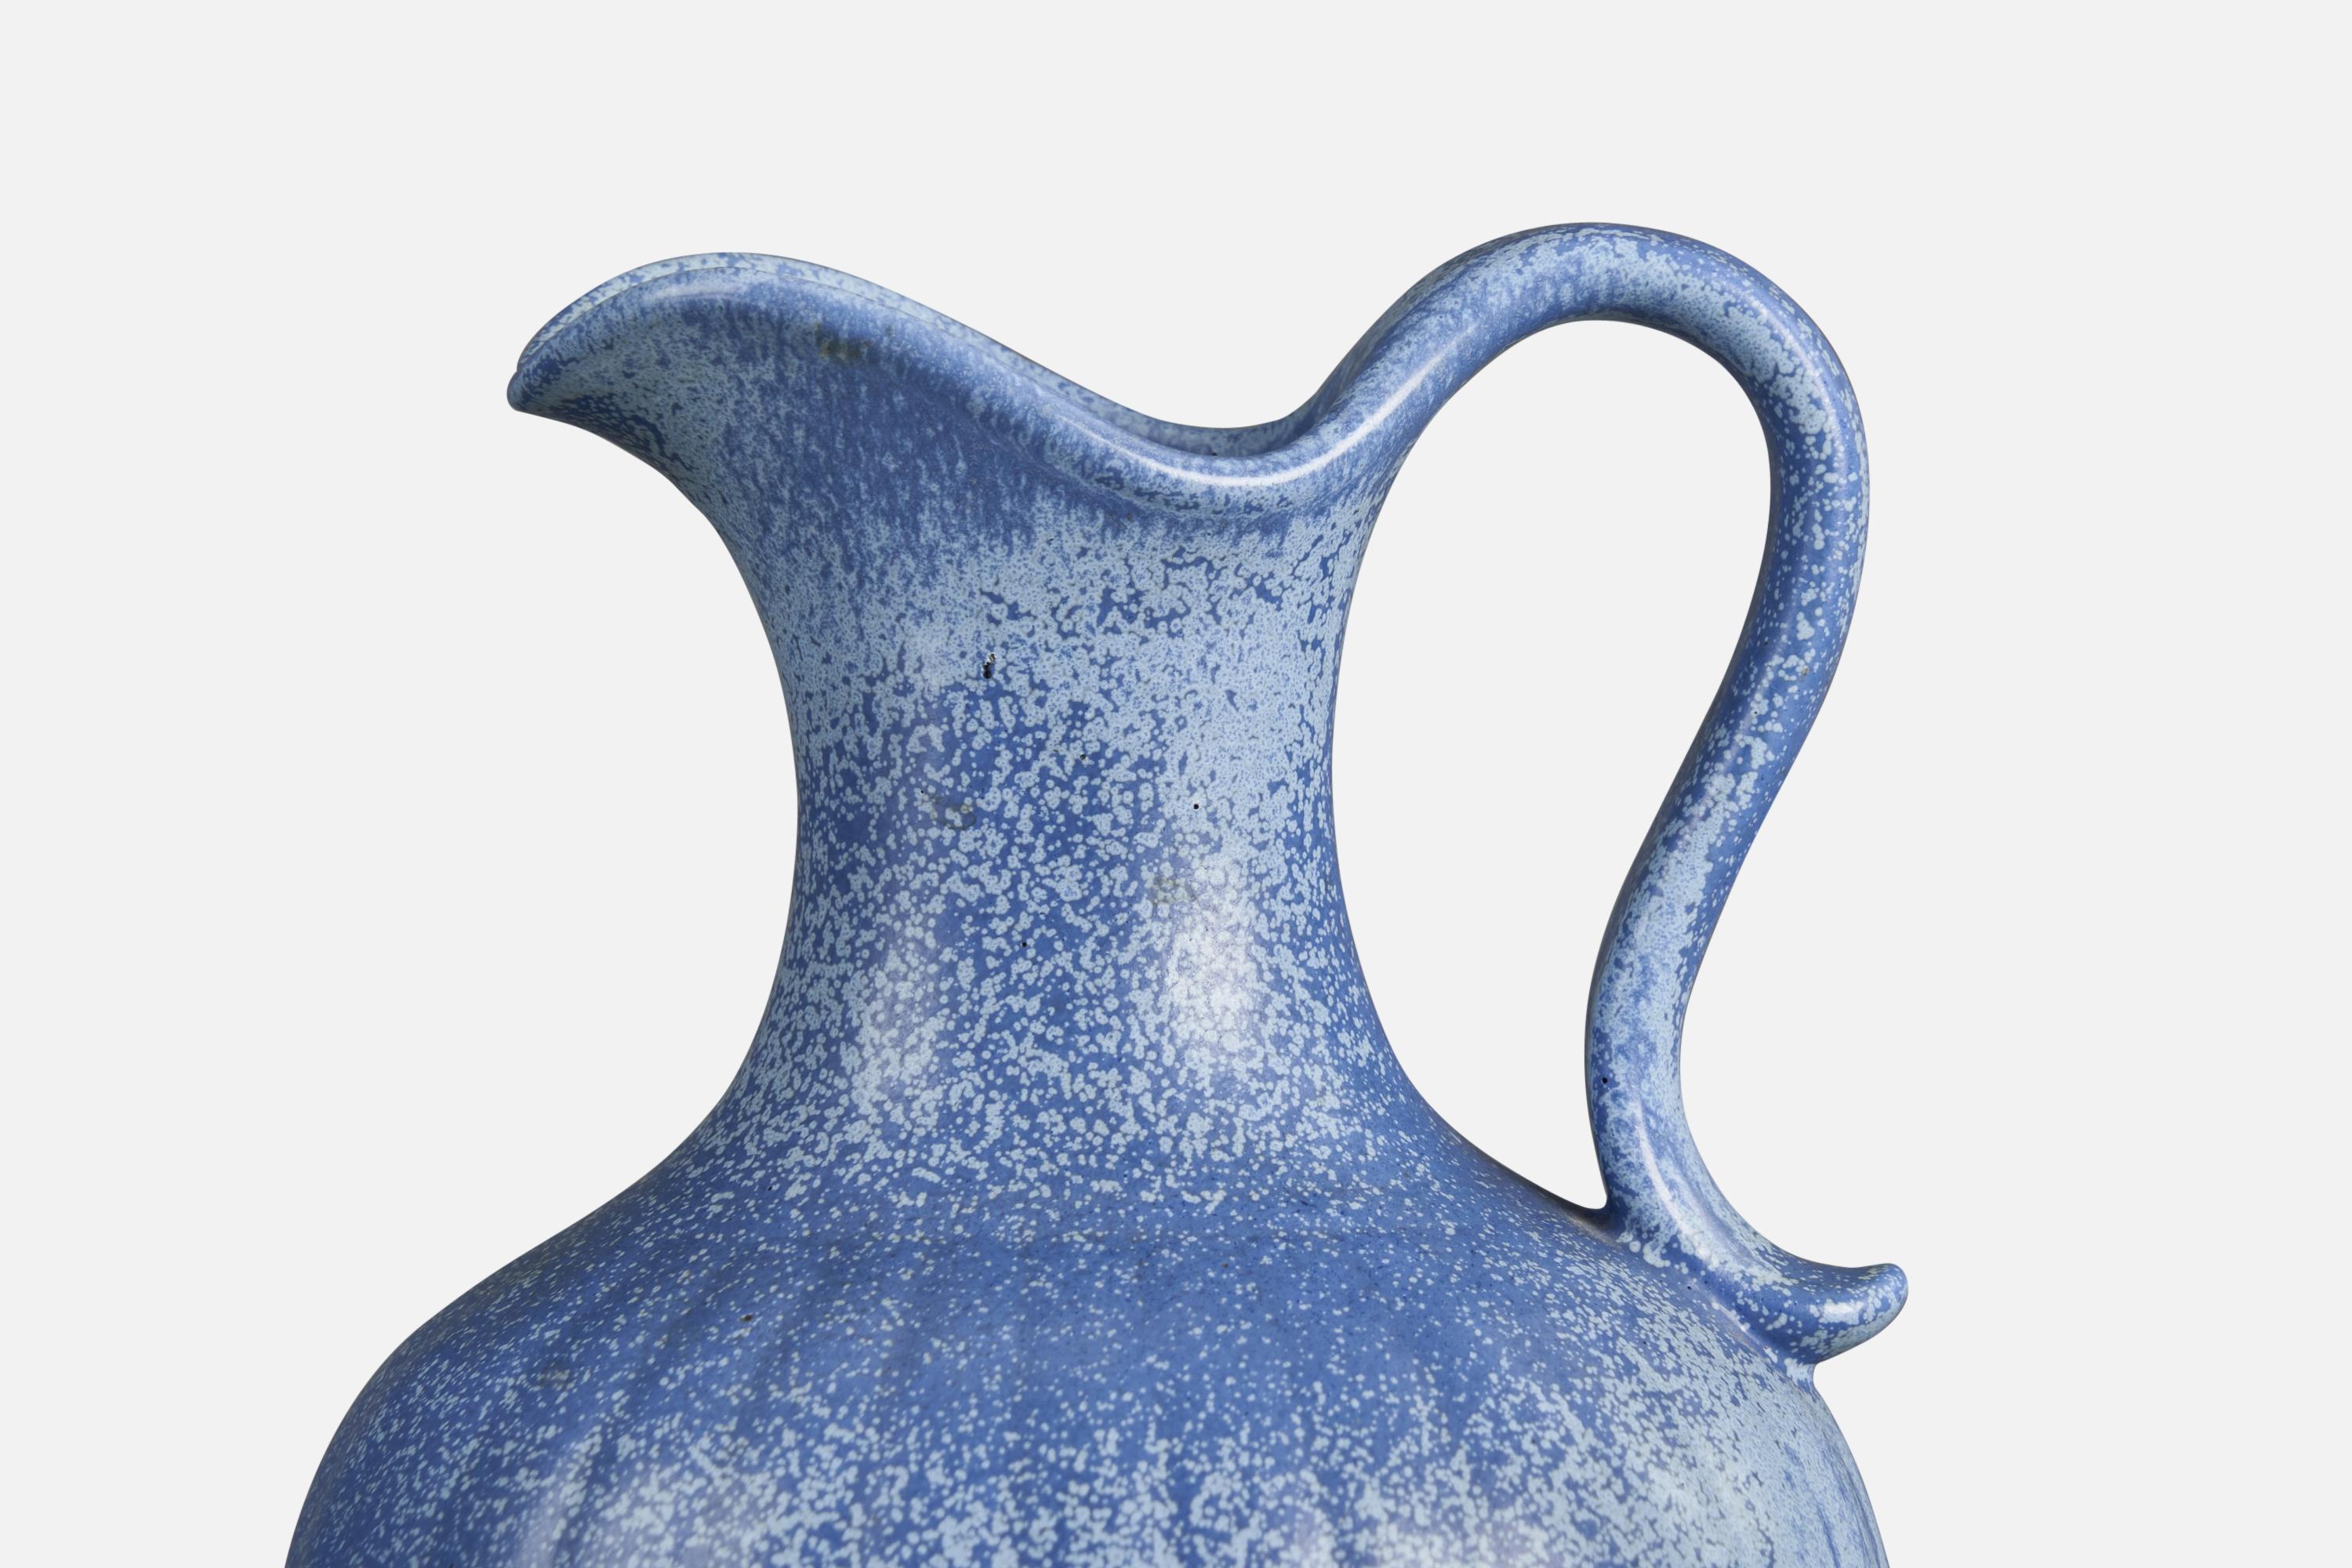 A stoneware pitcher designed by Gunnar Nylund and produced by Rörstrand, Sweden, 1940s.